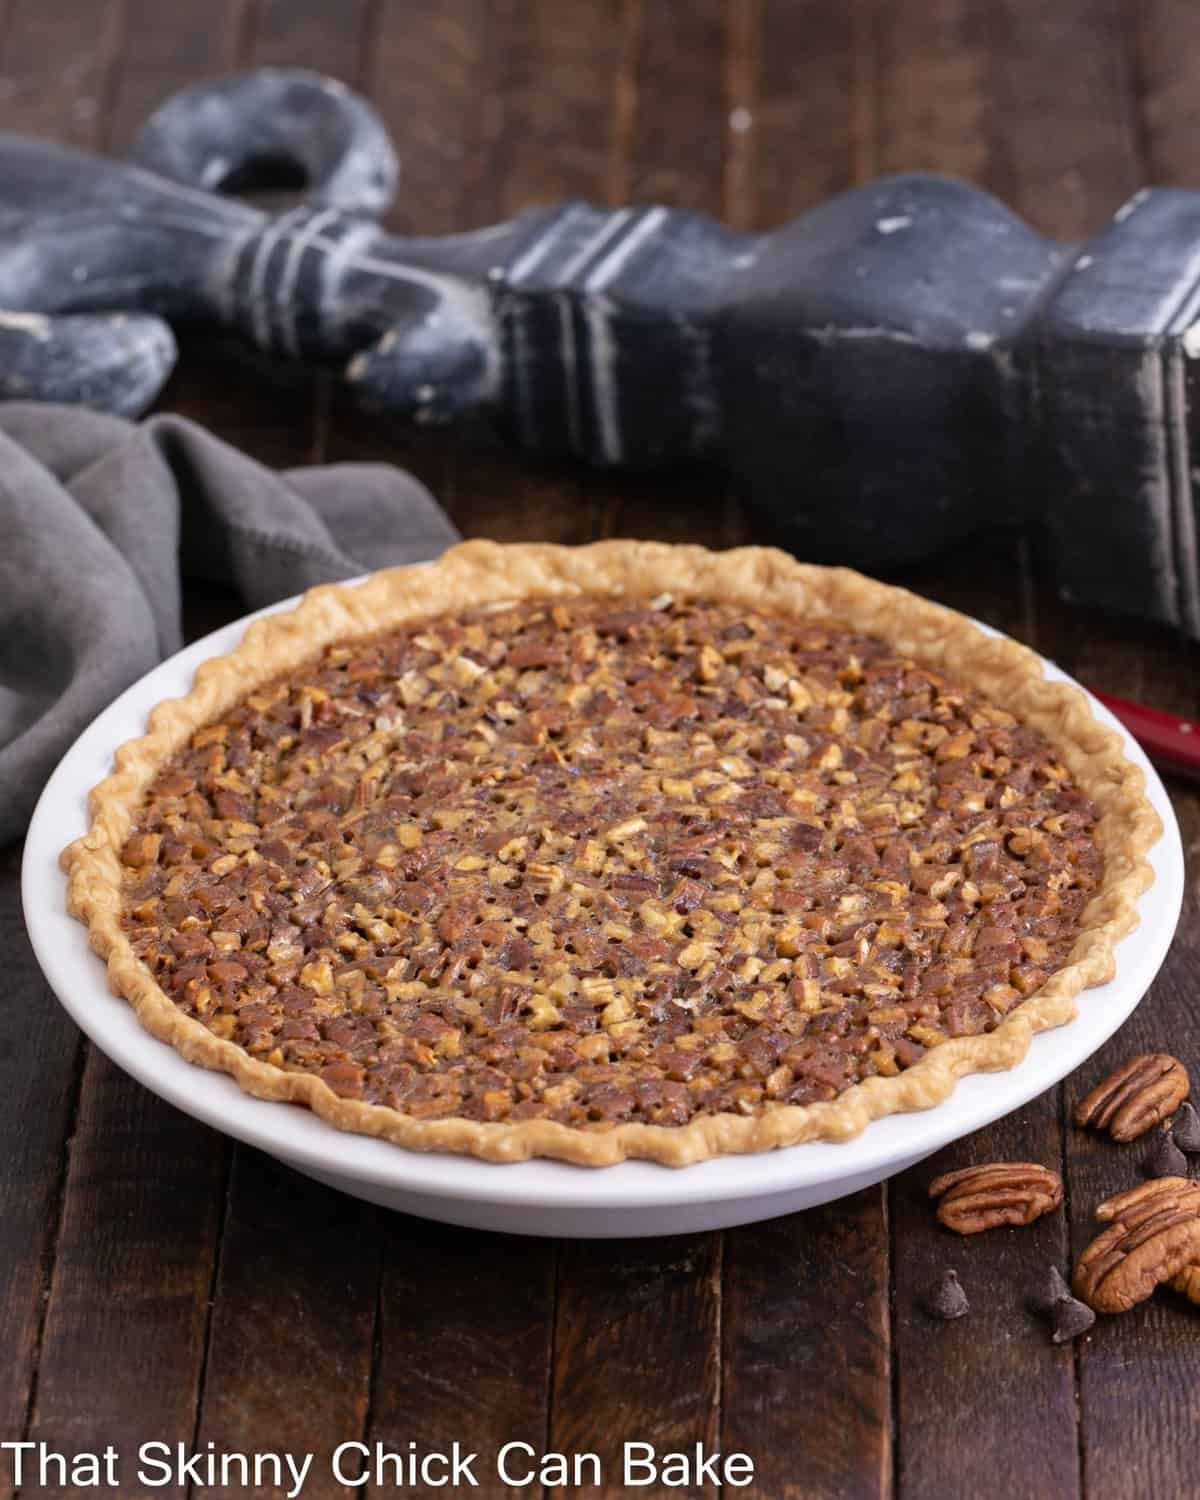 Side view of whole, uncut chocolate pecan pie recipe.